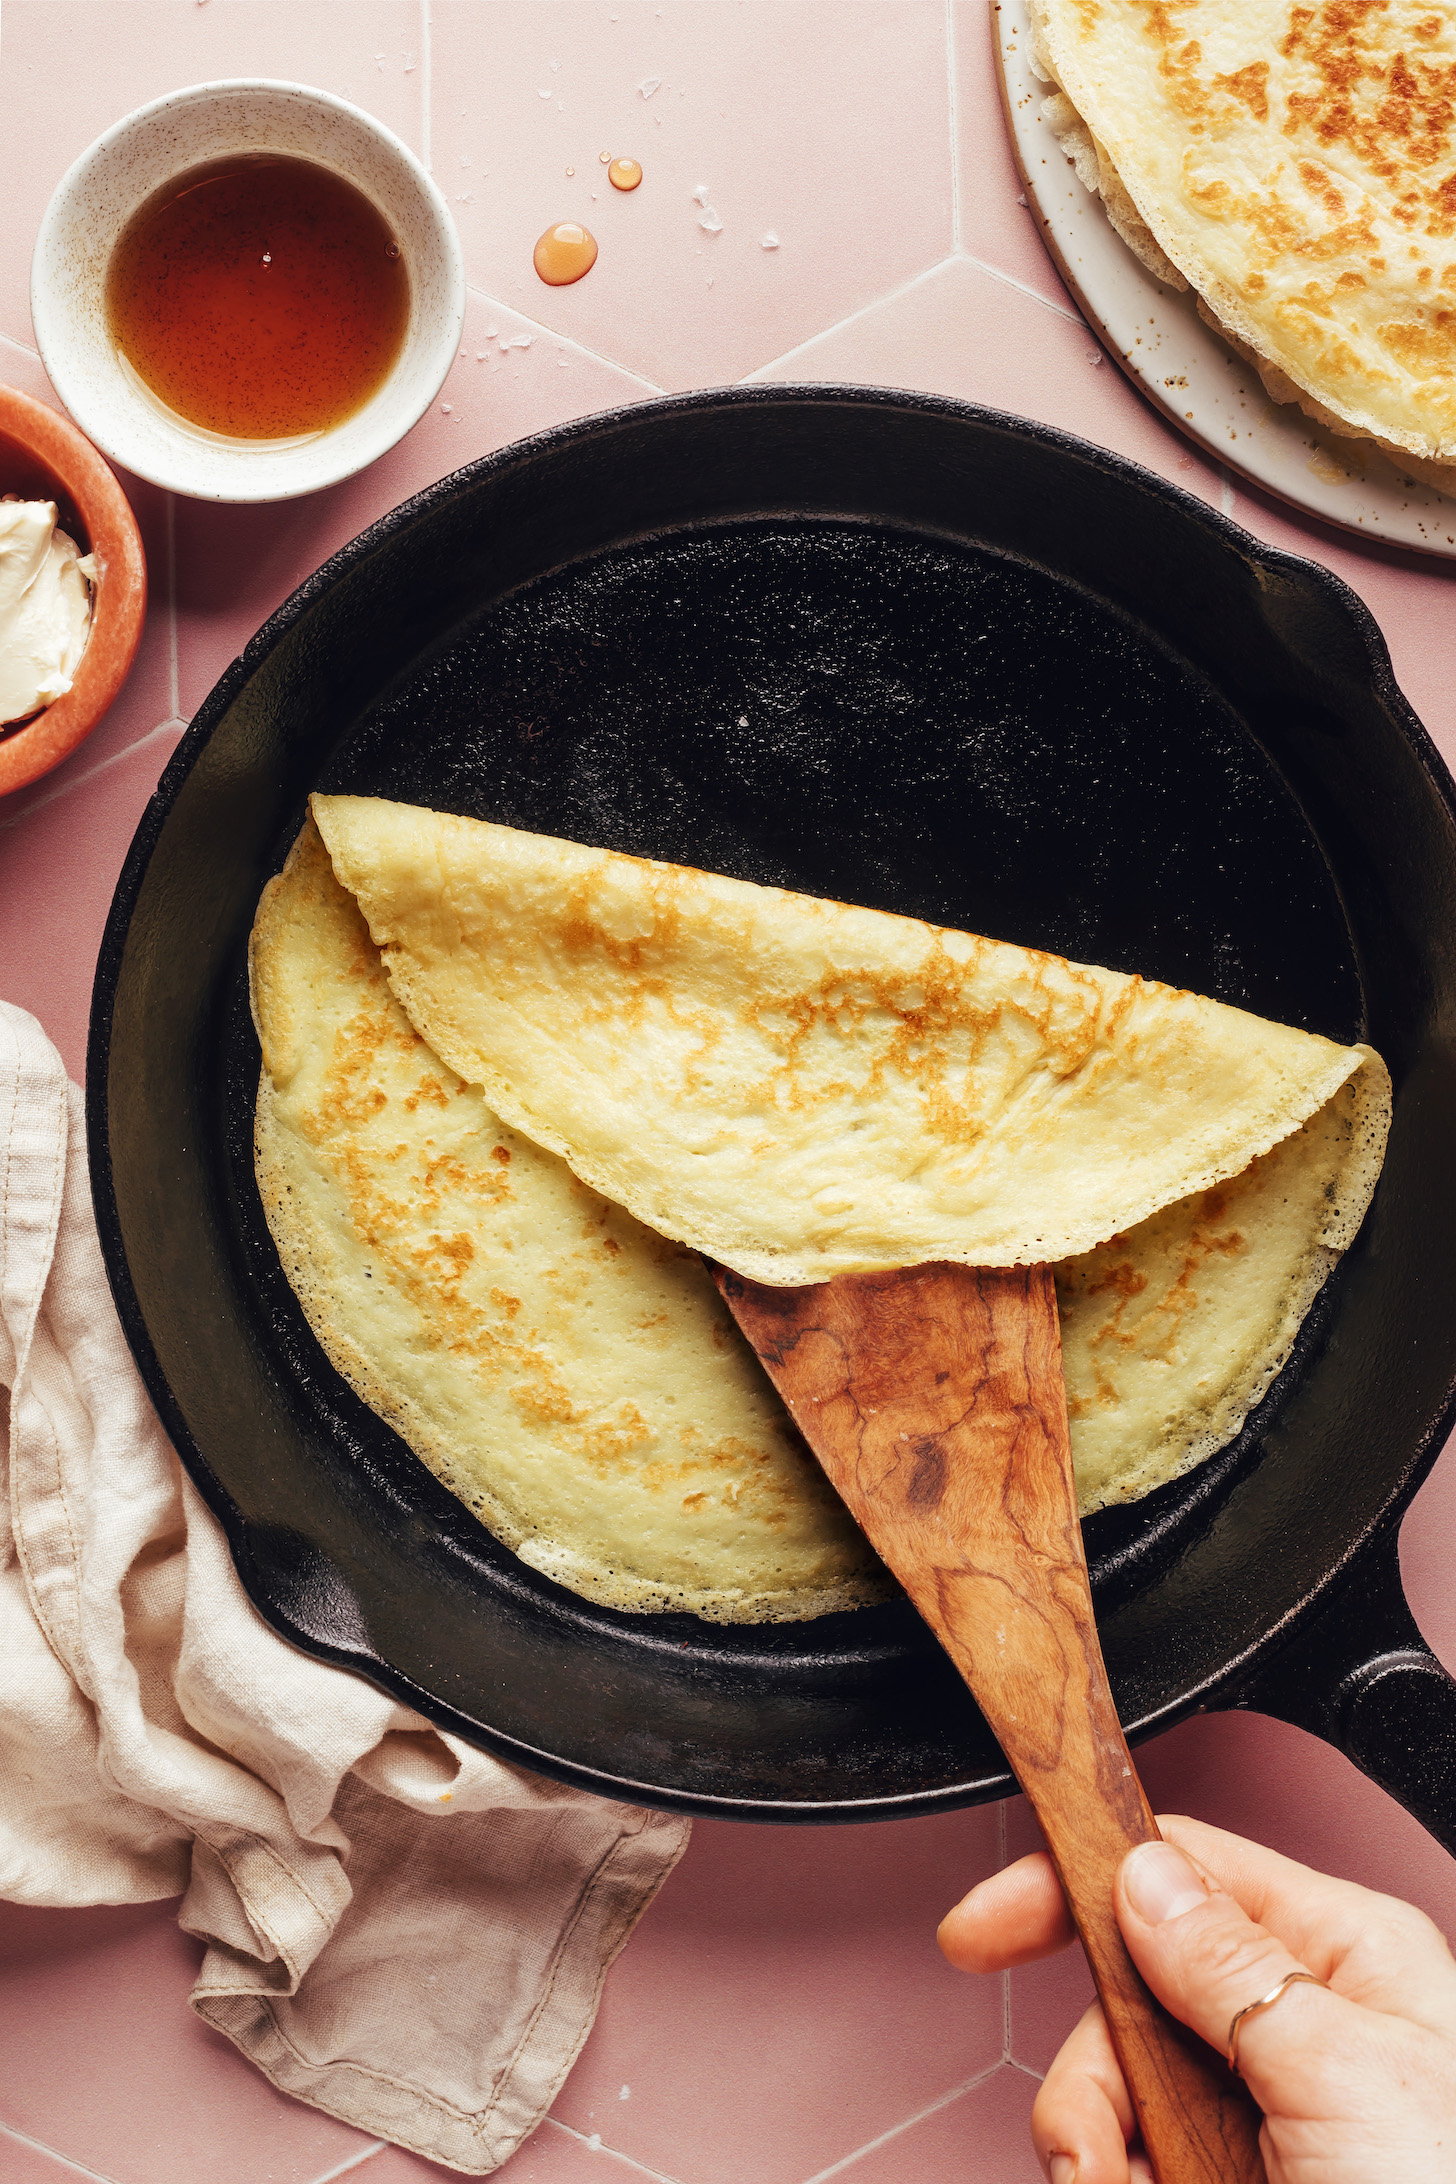 Using a wooden spoon to show the golden brown underside of a crepe in a cast iron skillet